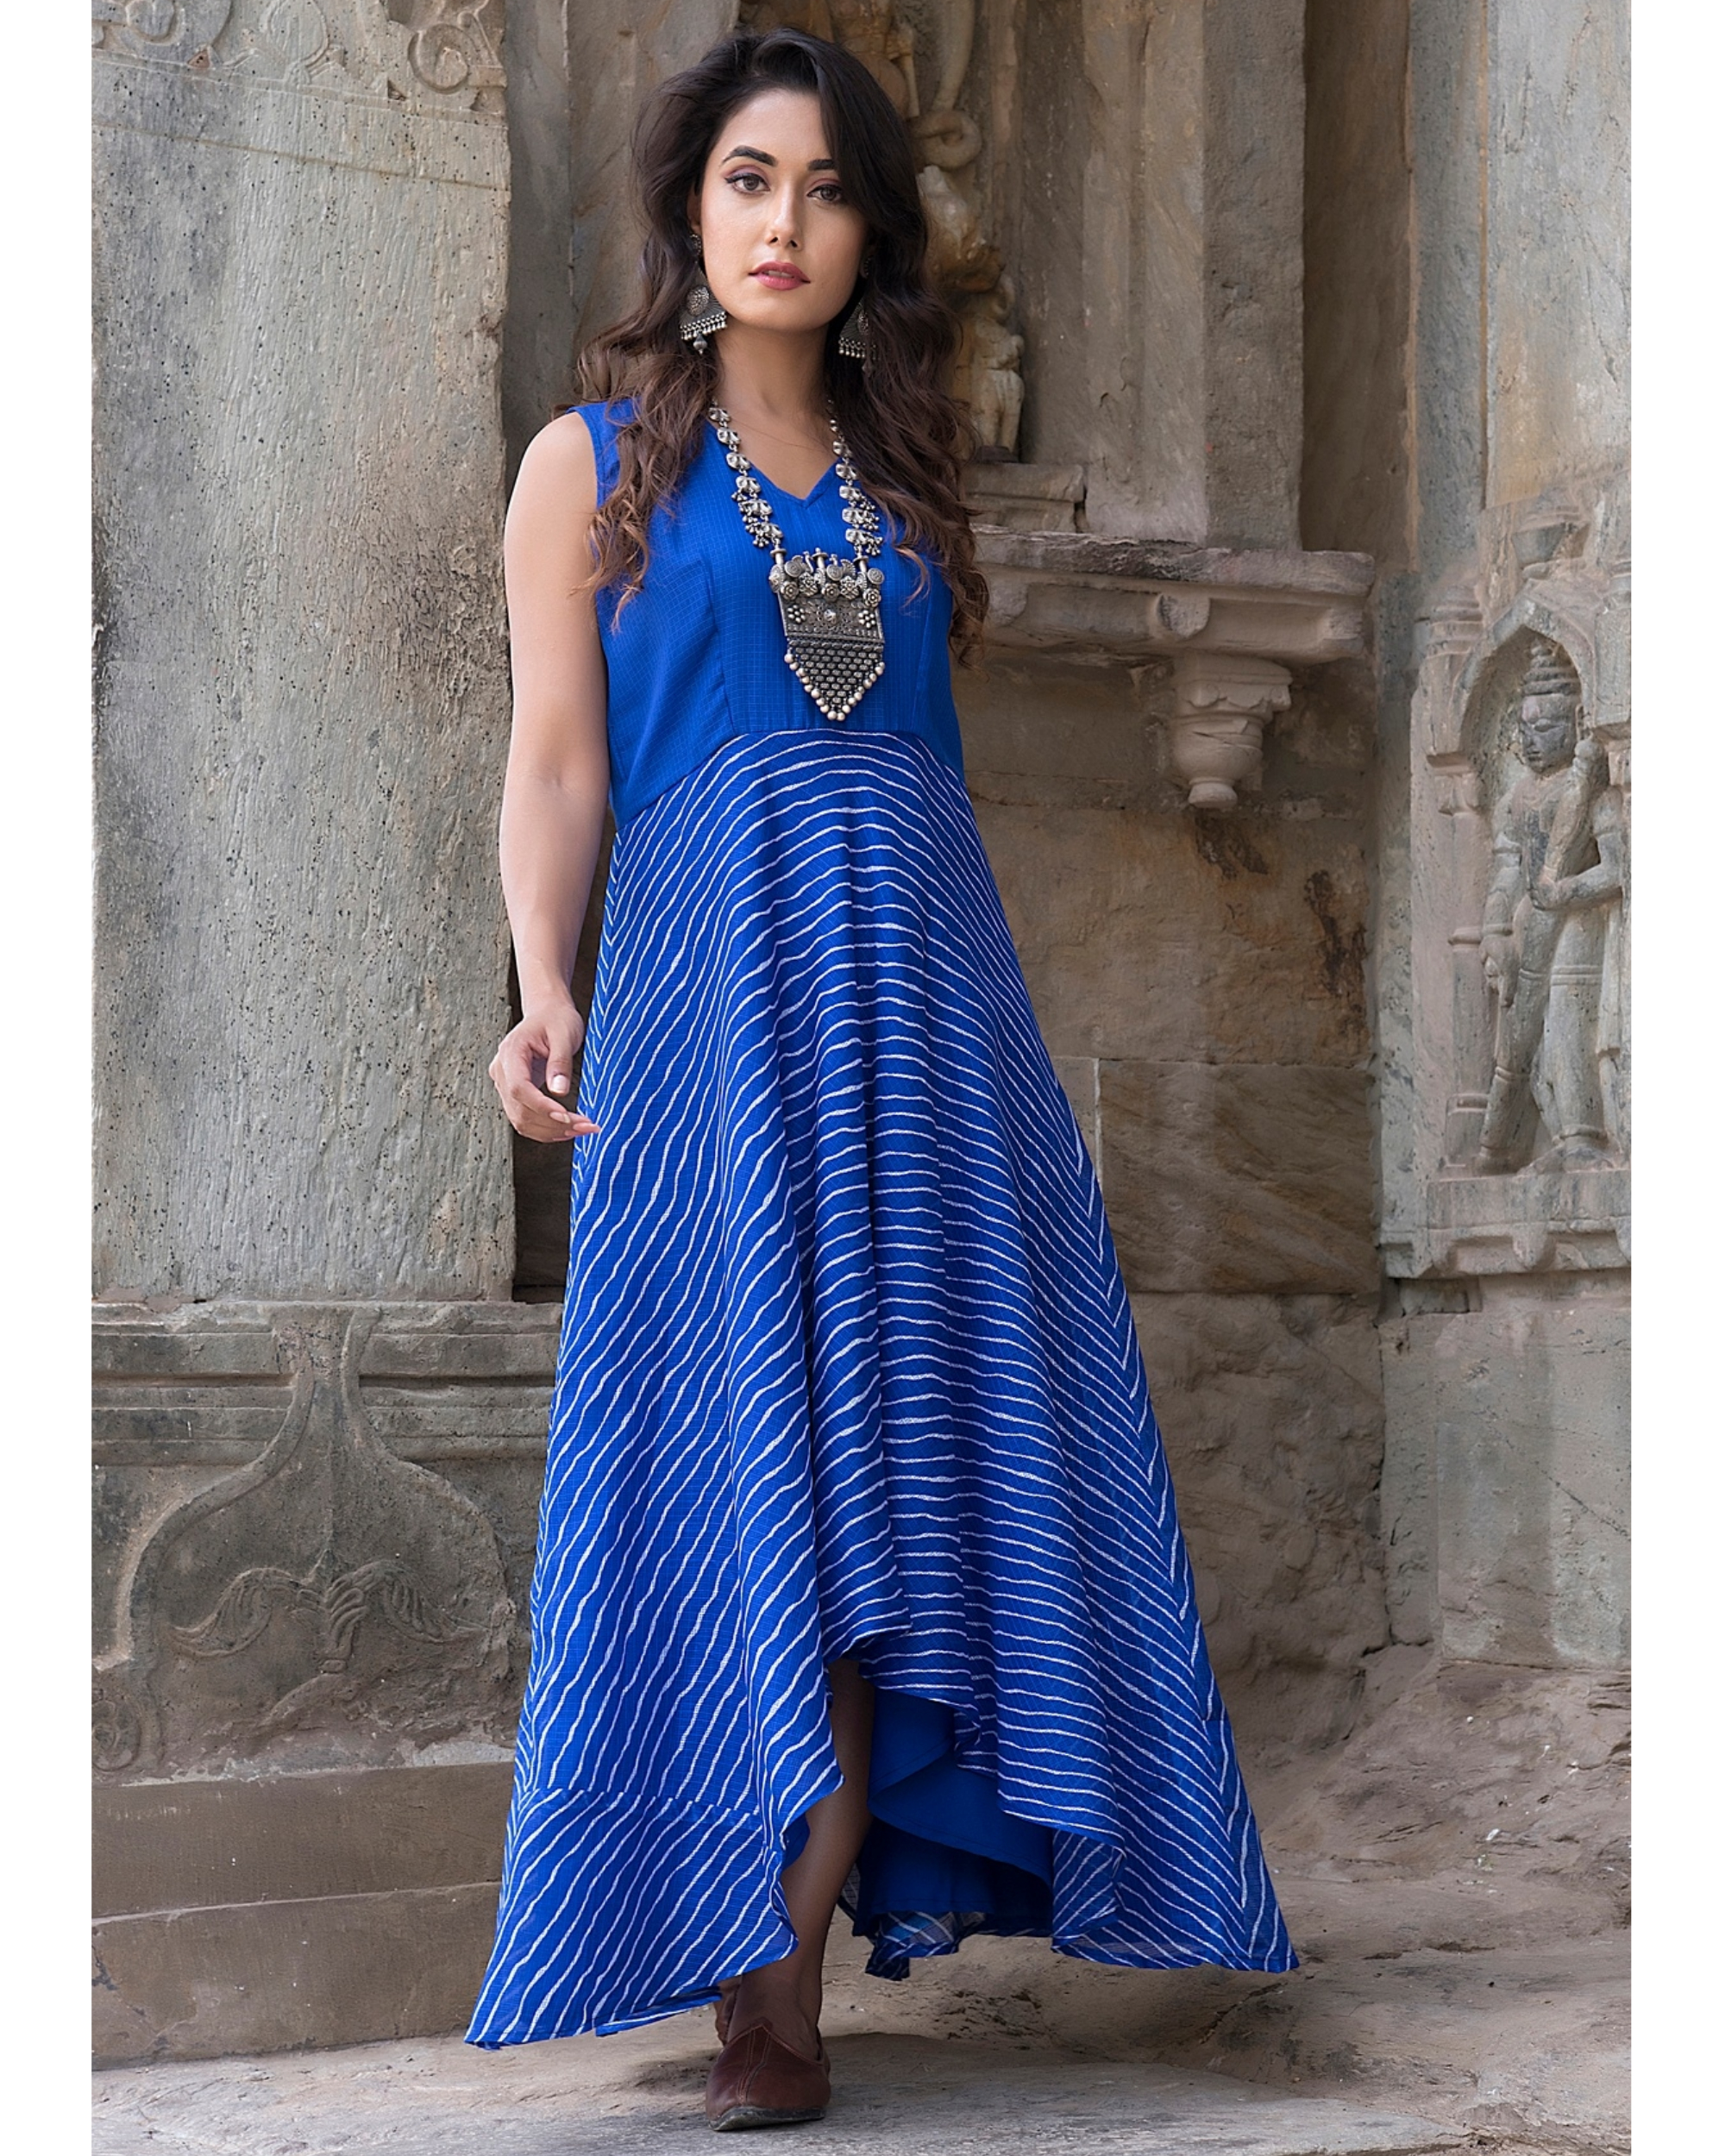 Egyptian blue high low dress by The Home Affair | The Secret Label